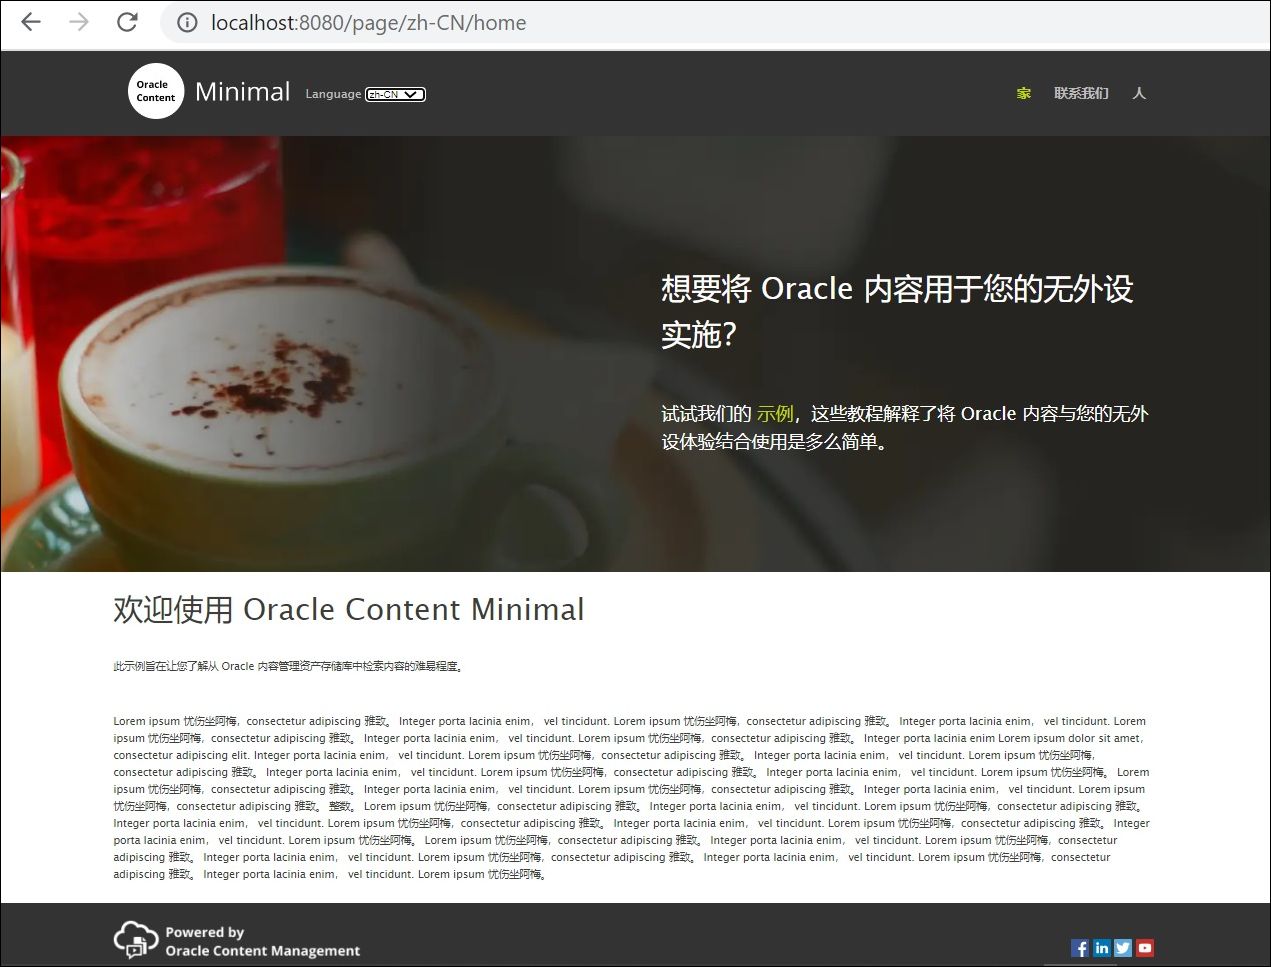 The Chinese home page